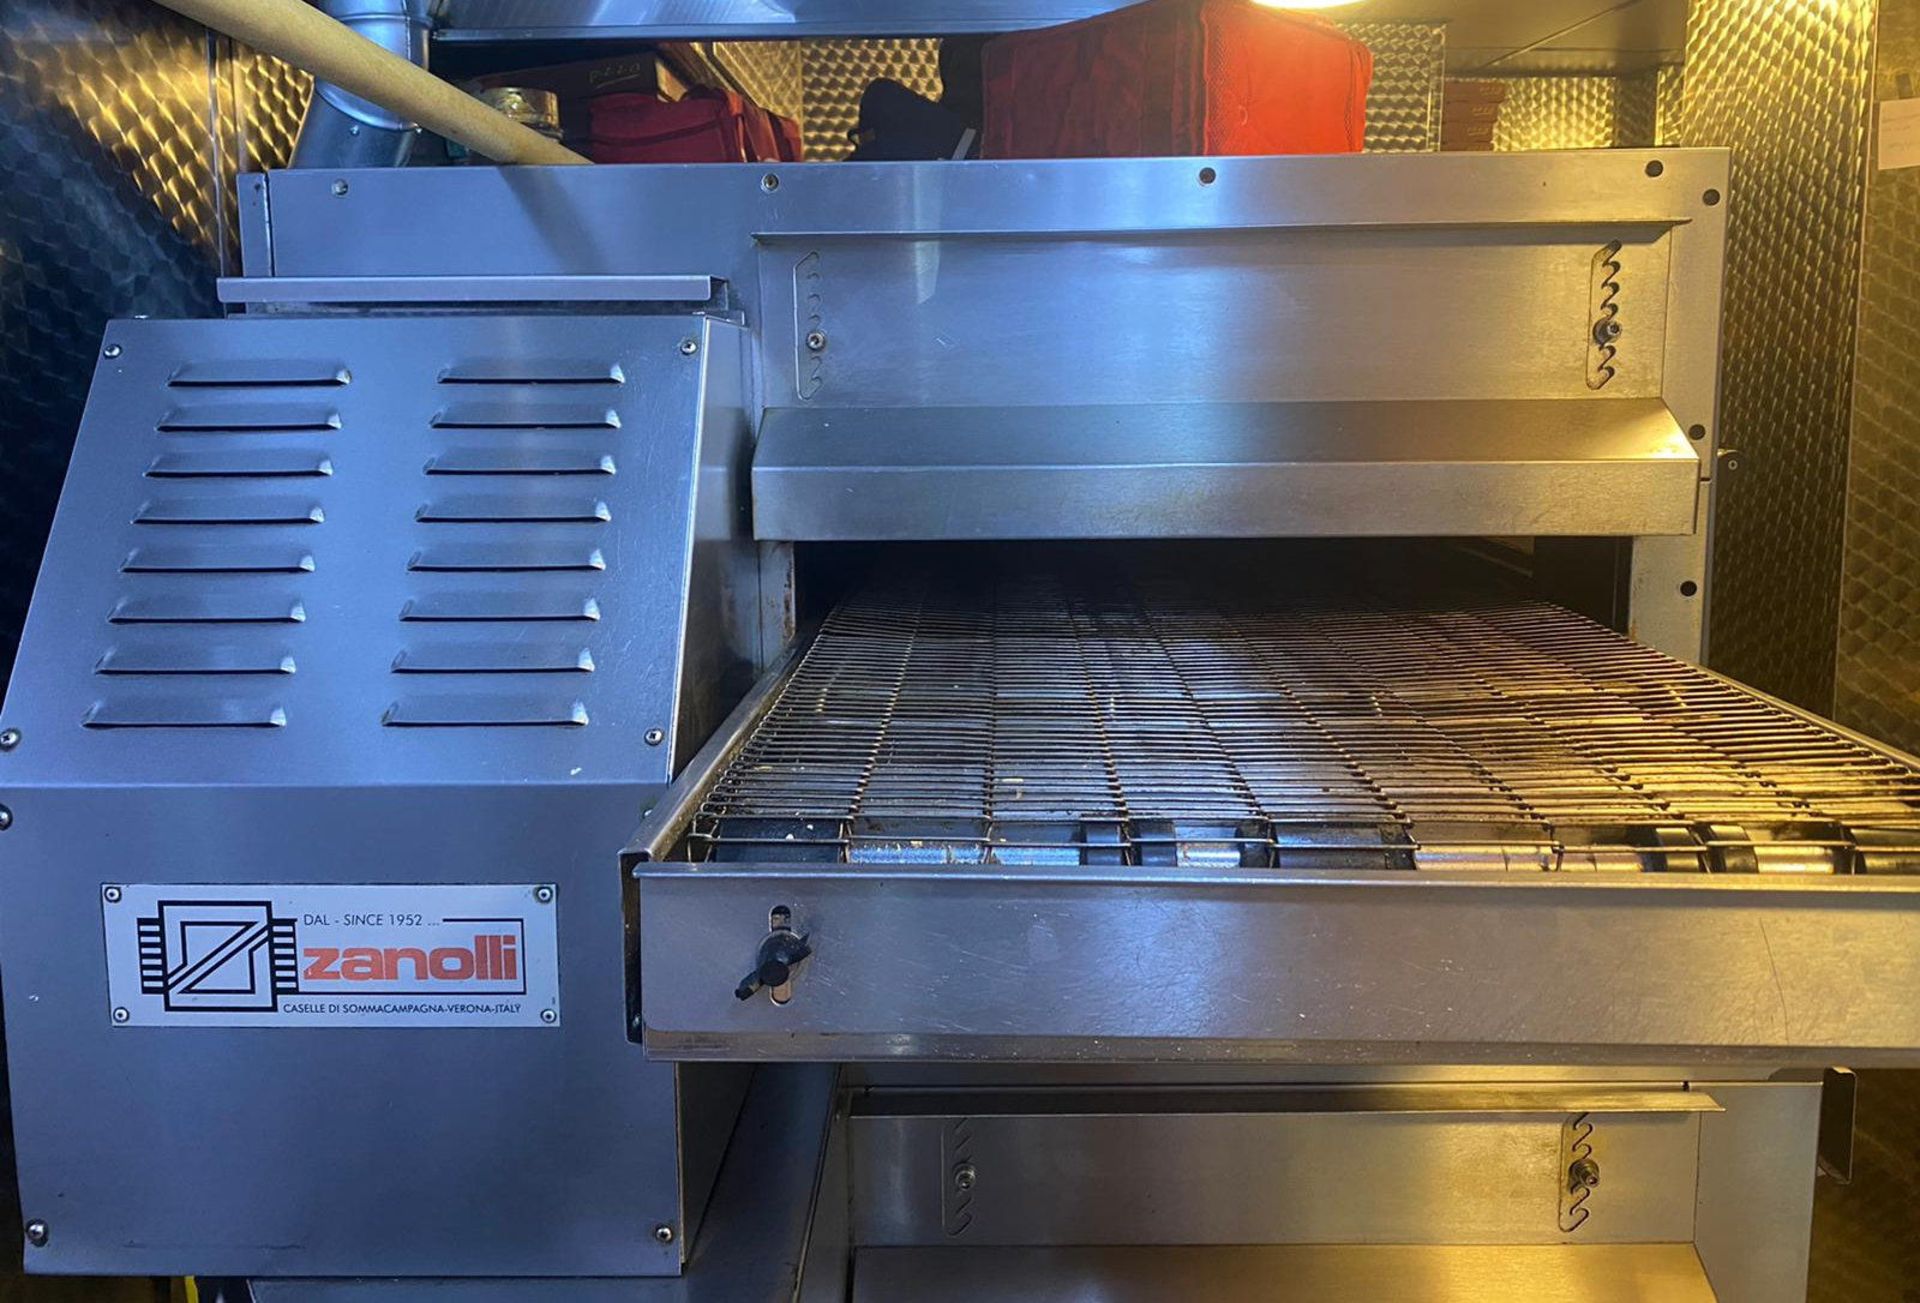 1 x Zanolli Synthesis 08/50 V Conveyor Pizza Oven - Requires repair - CL633 - Location: - Image 6 of 7